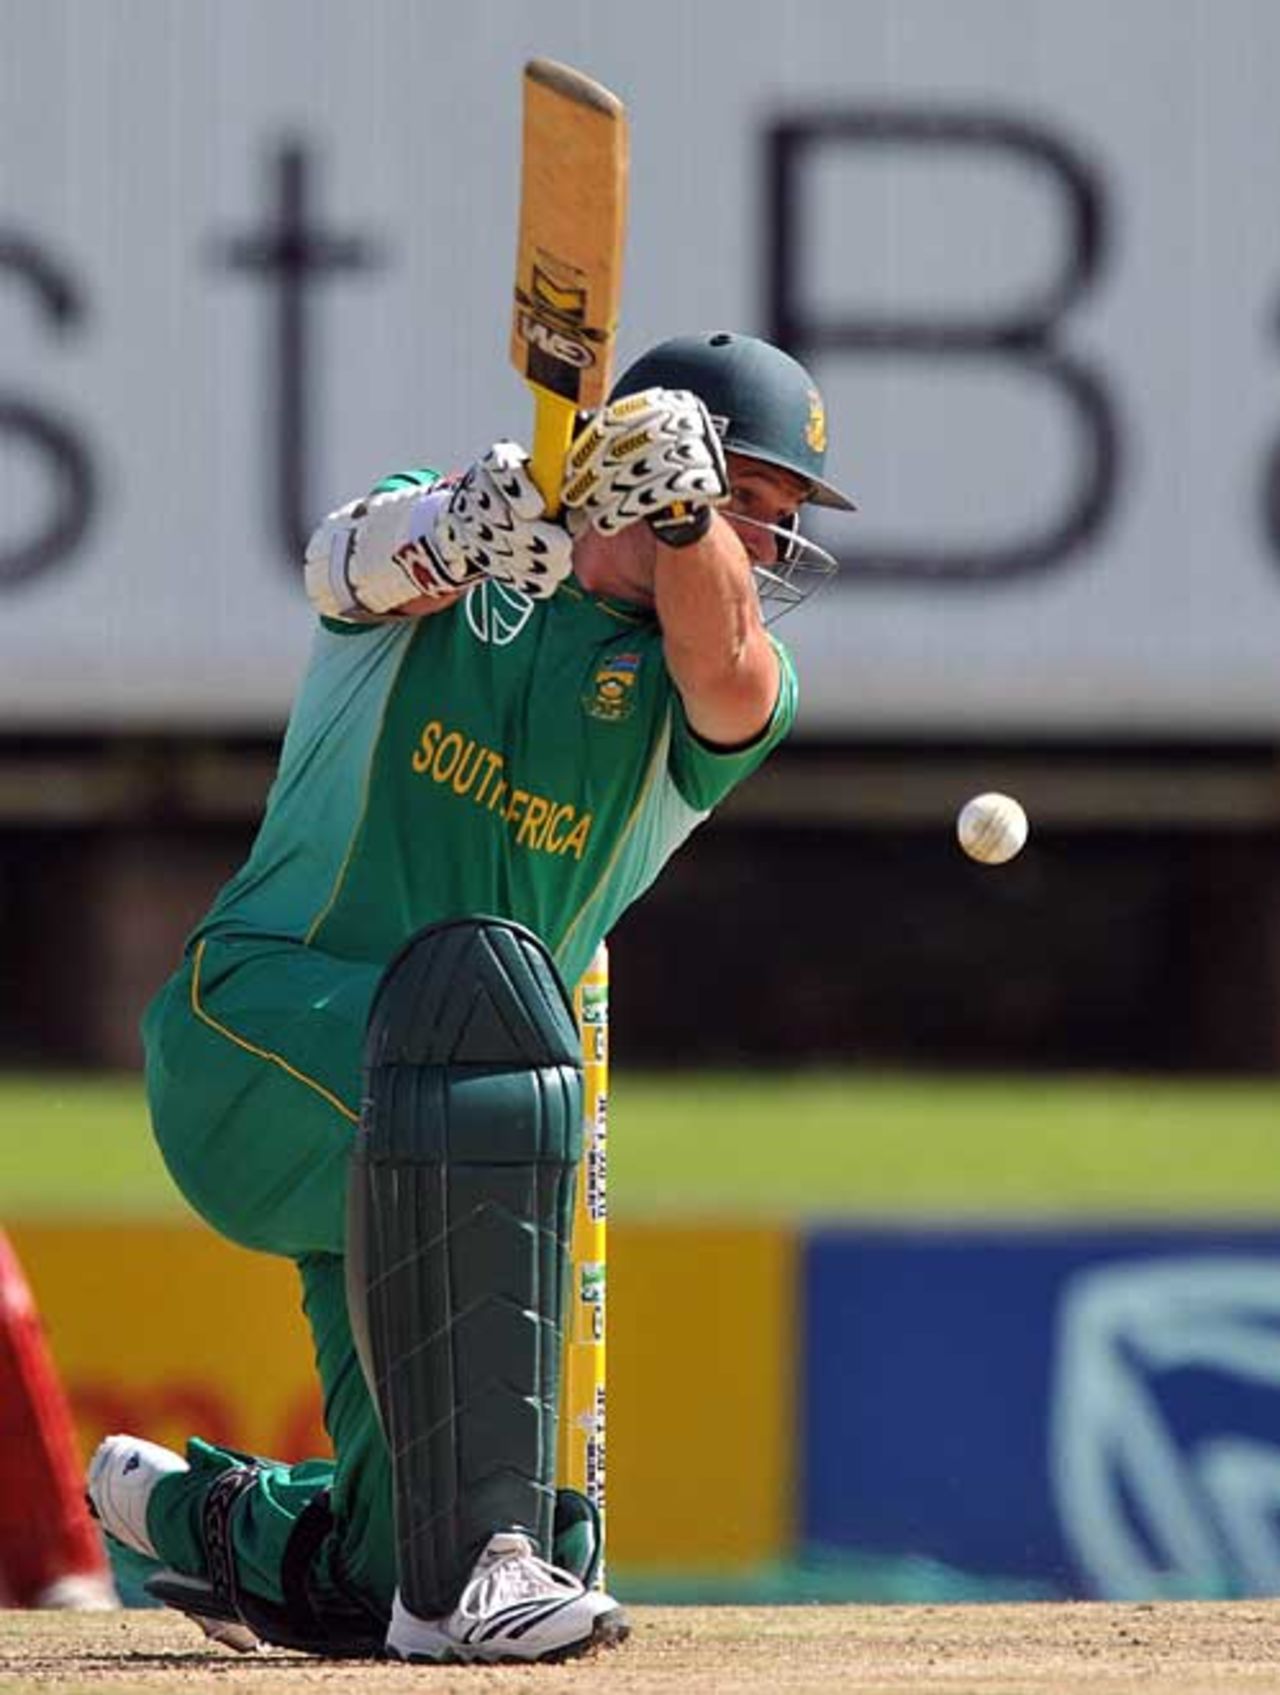 Graeme Smith goes for a booming drive, South Africa v Zimbabwe, 2nd ODI, Centurion, November 10, 2009